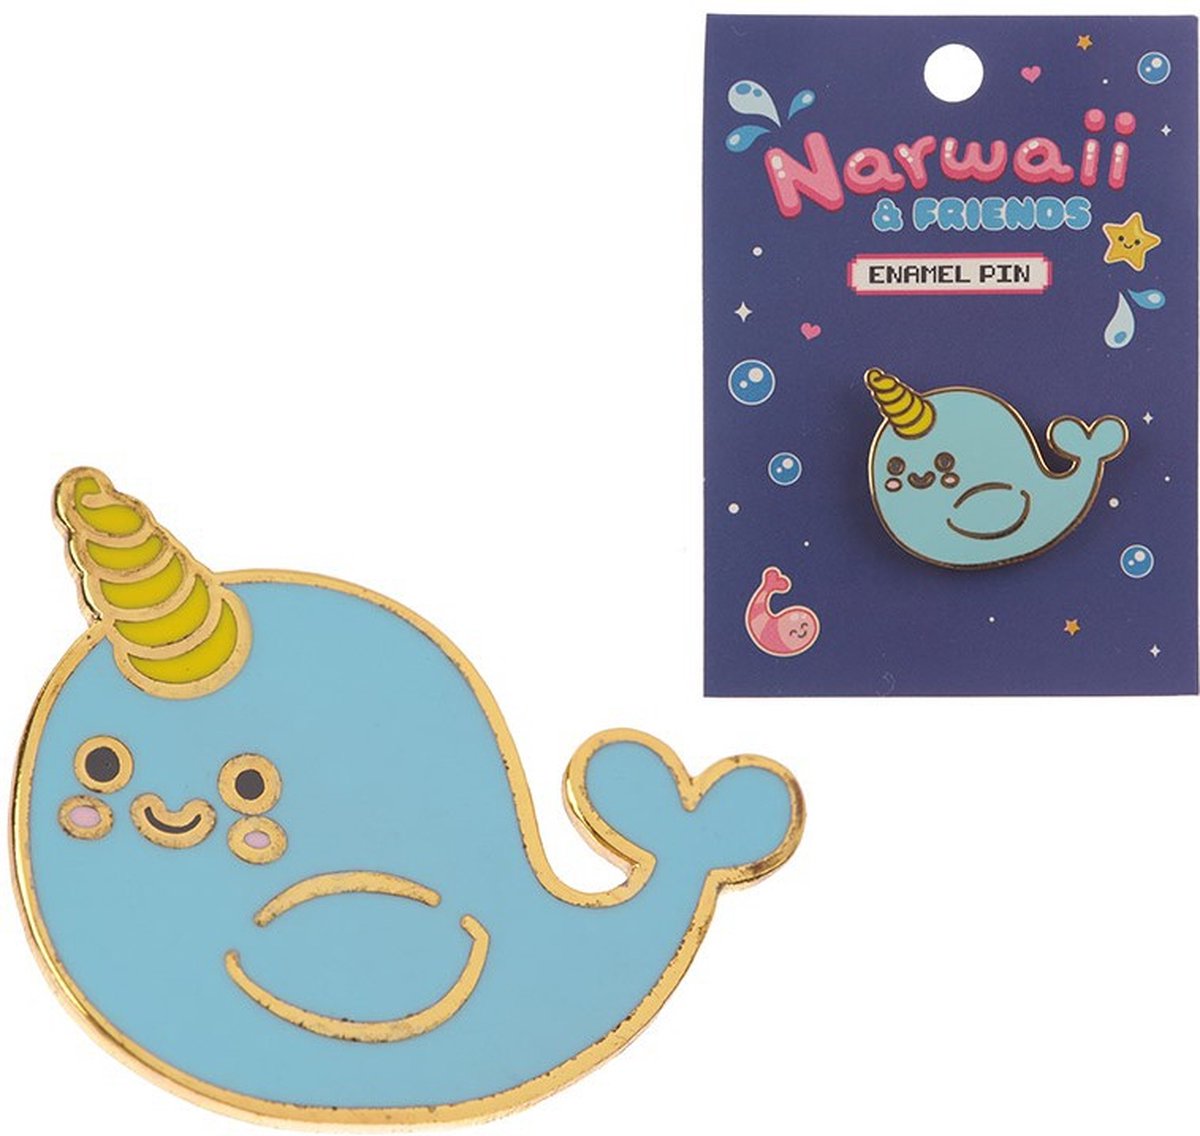 Puckator Narwaii and Friends - Narwhal pin - Broche